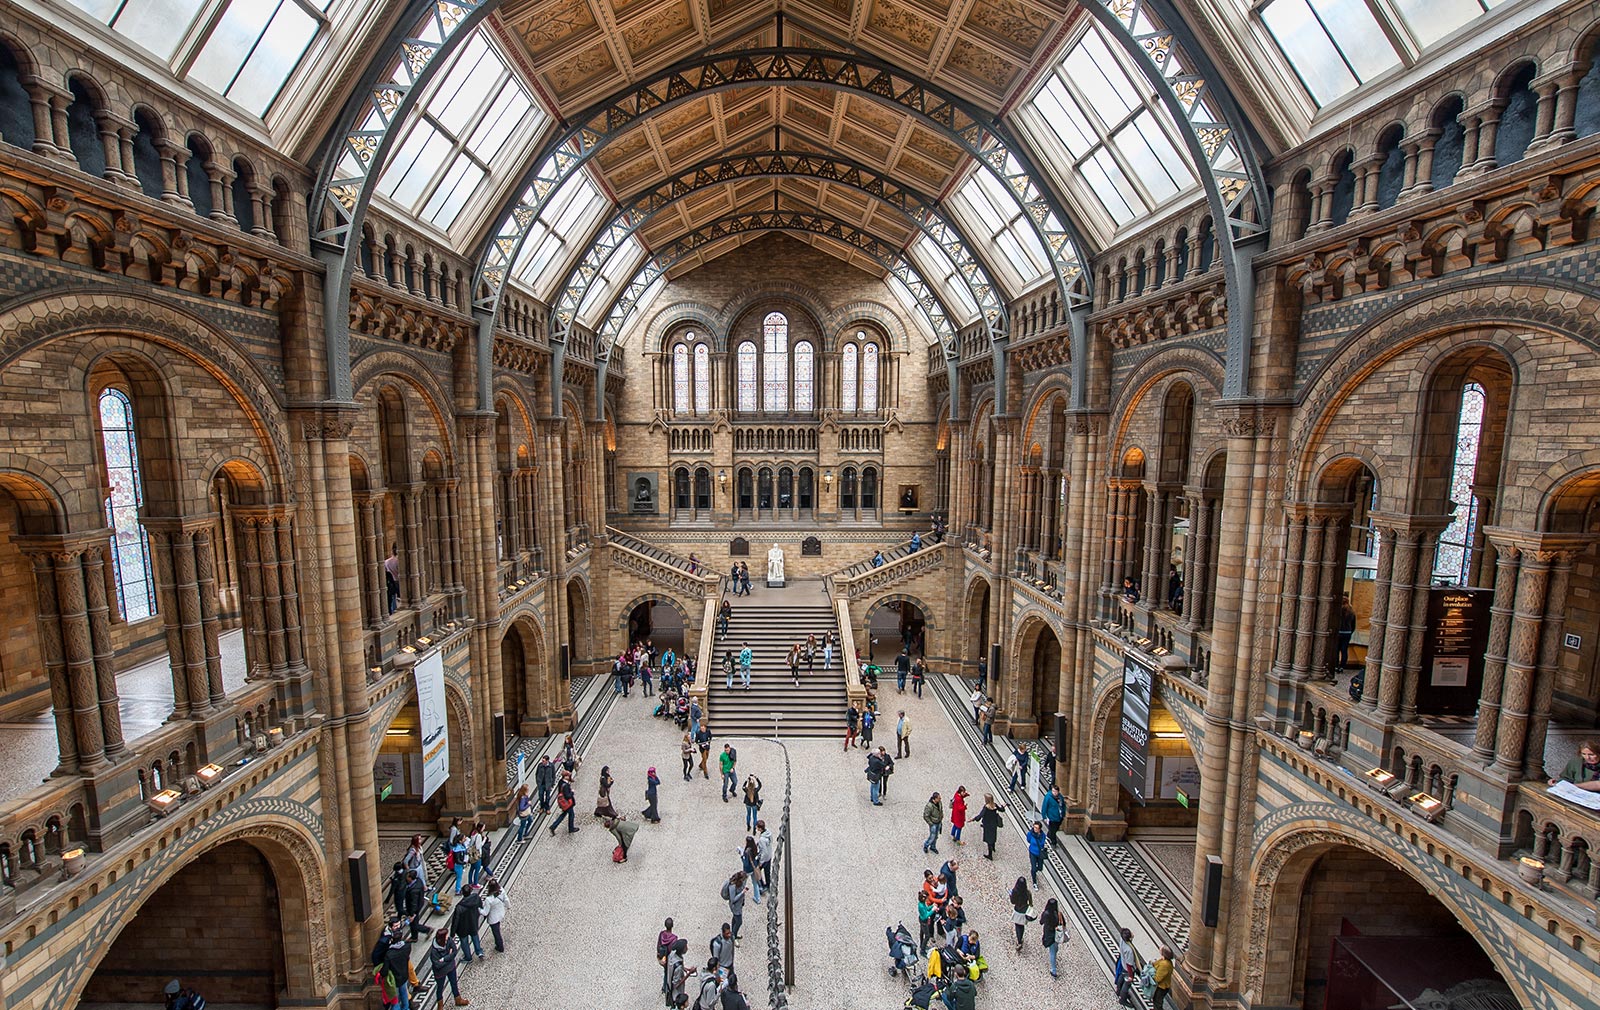 Interior of the Natural History Museum in London